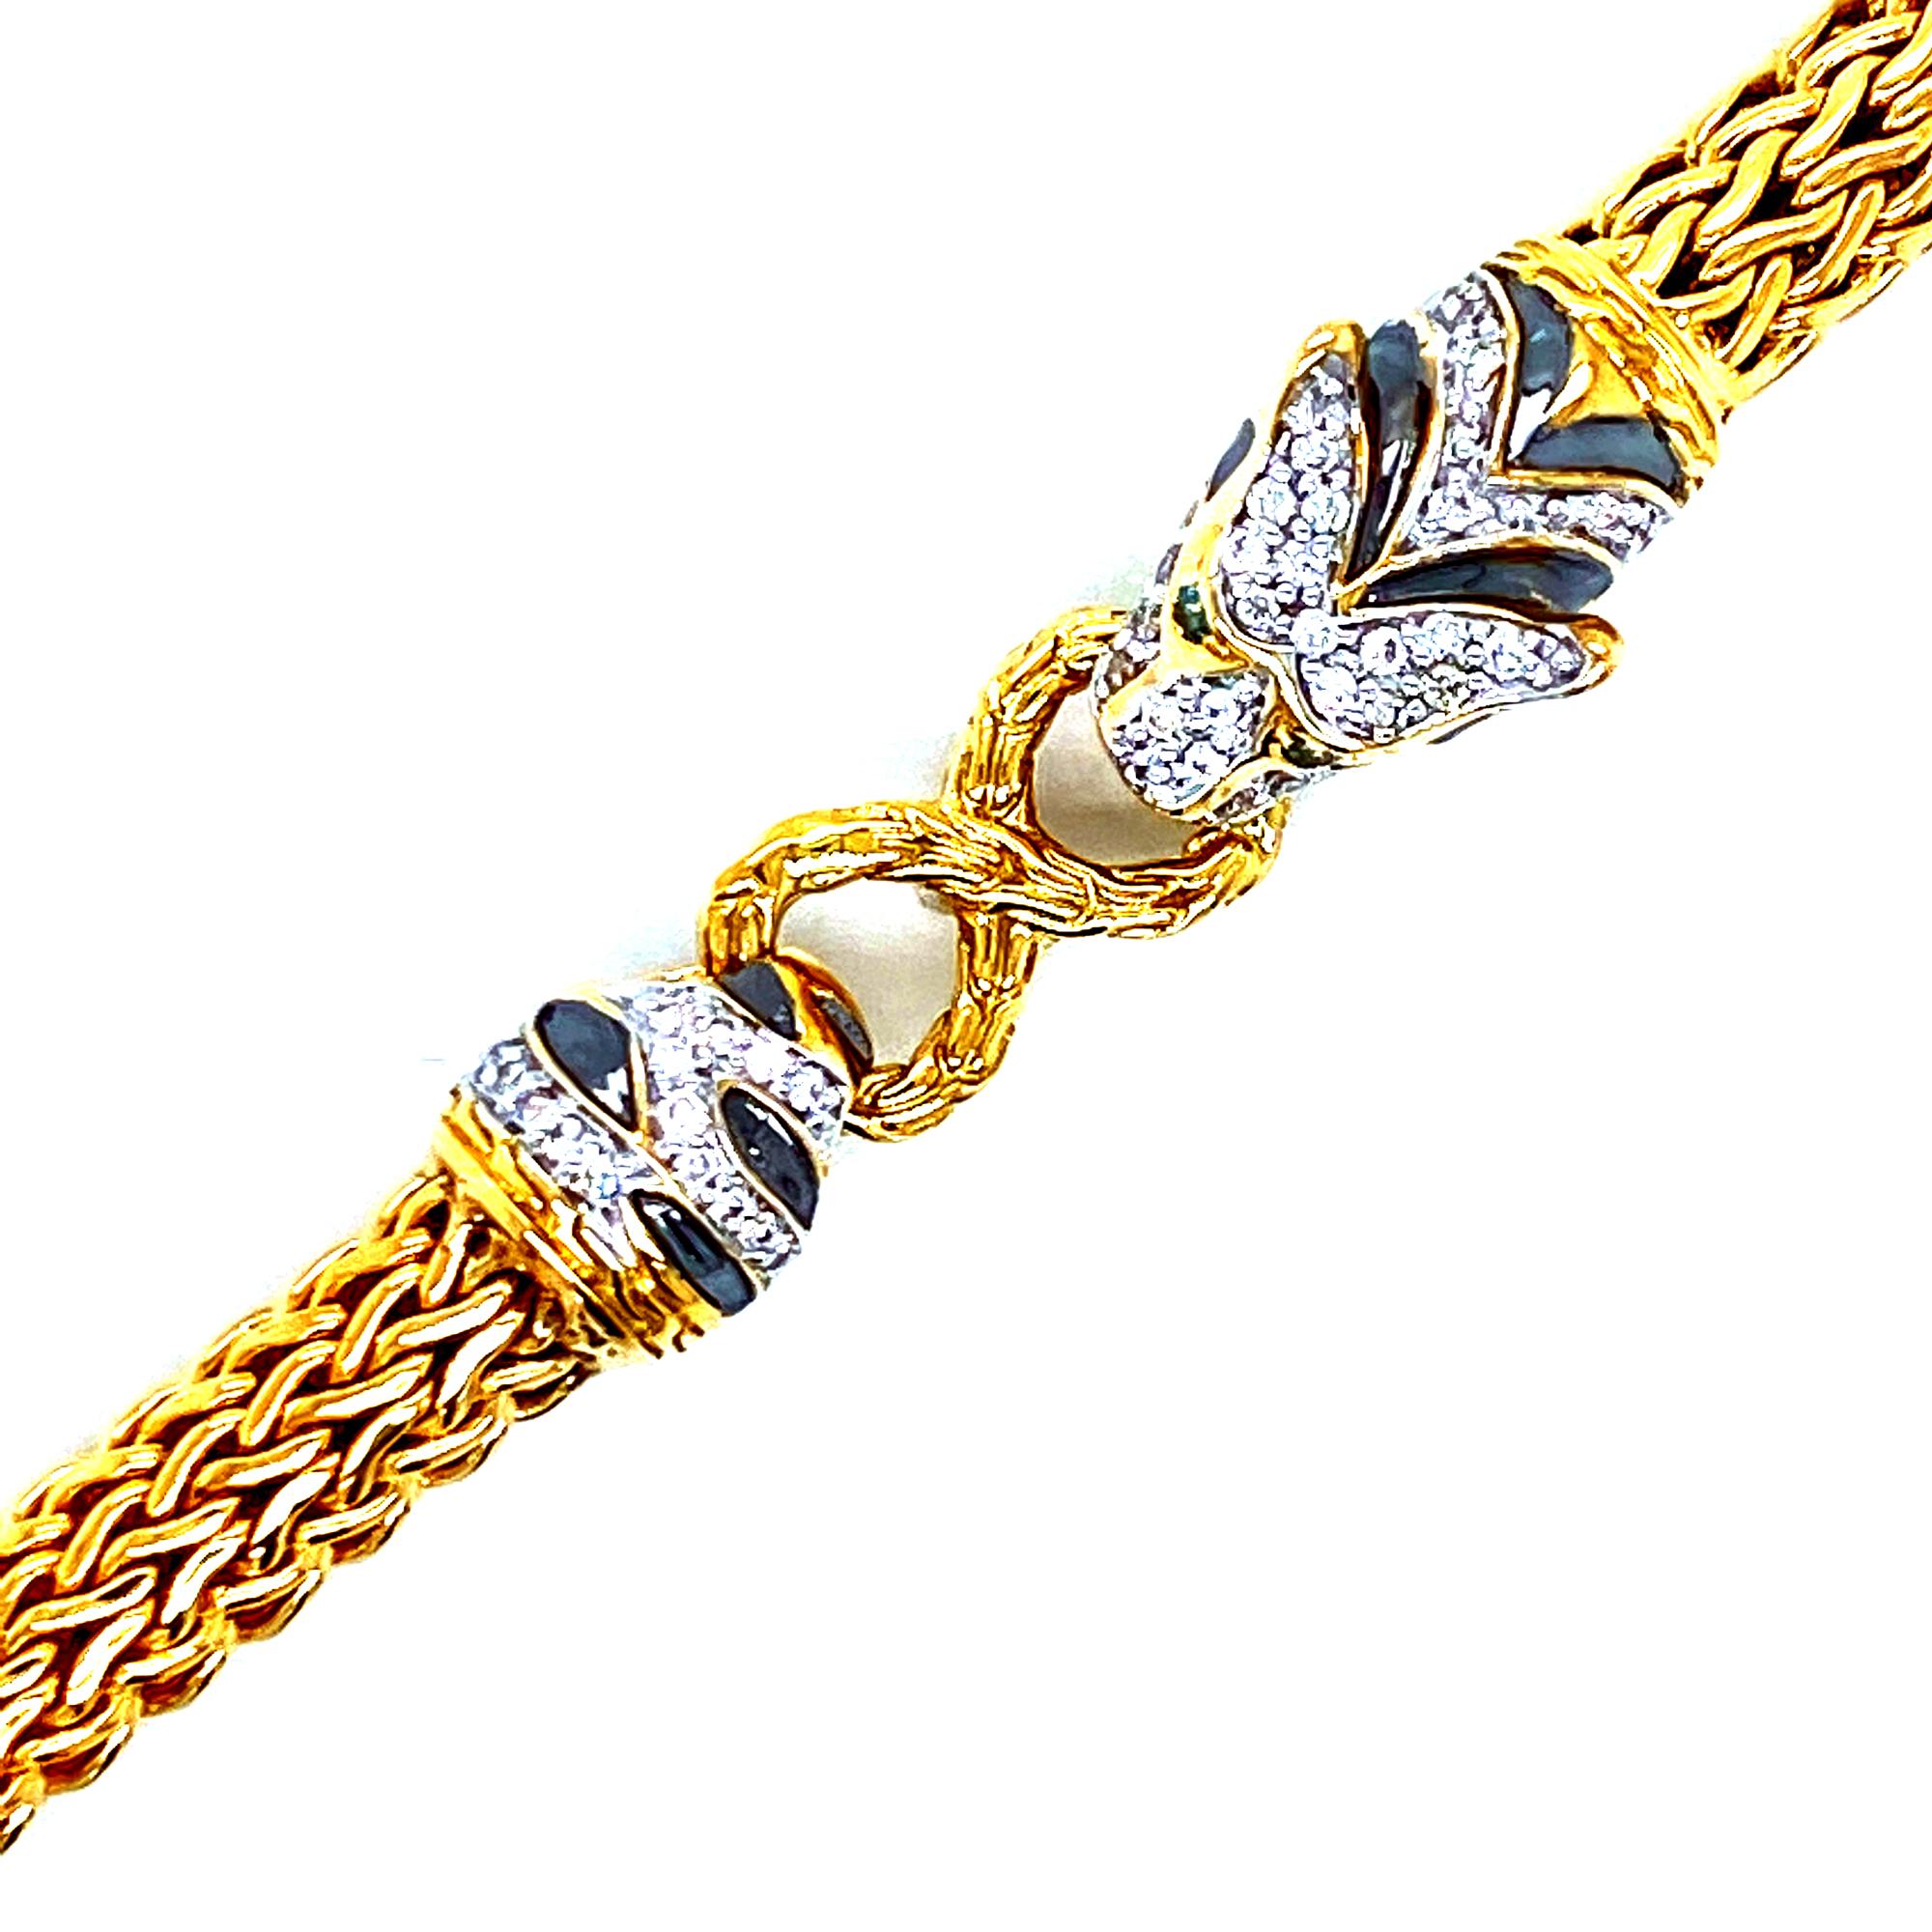 Fabulous diamond panther bracelet is part of the Legends collection designed by John Hardy. The classic link bracelet features a diamond panther top. The bracelet measures 6 inches in length without the clasp (for a small wrist), and 6-9mm in width.